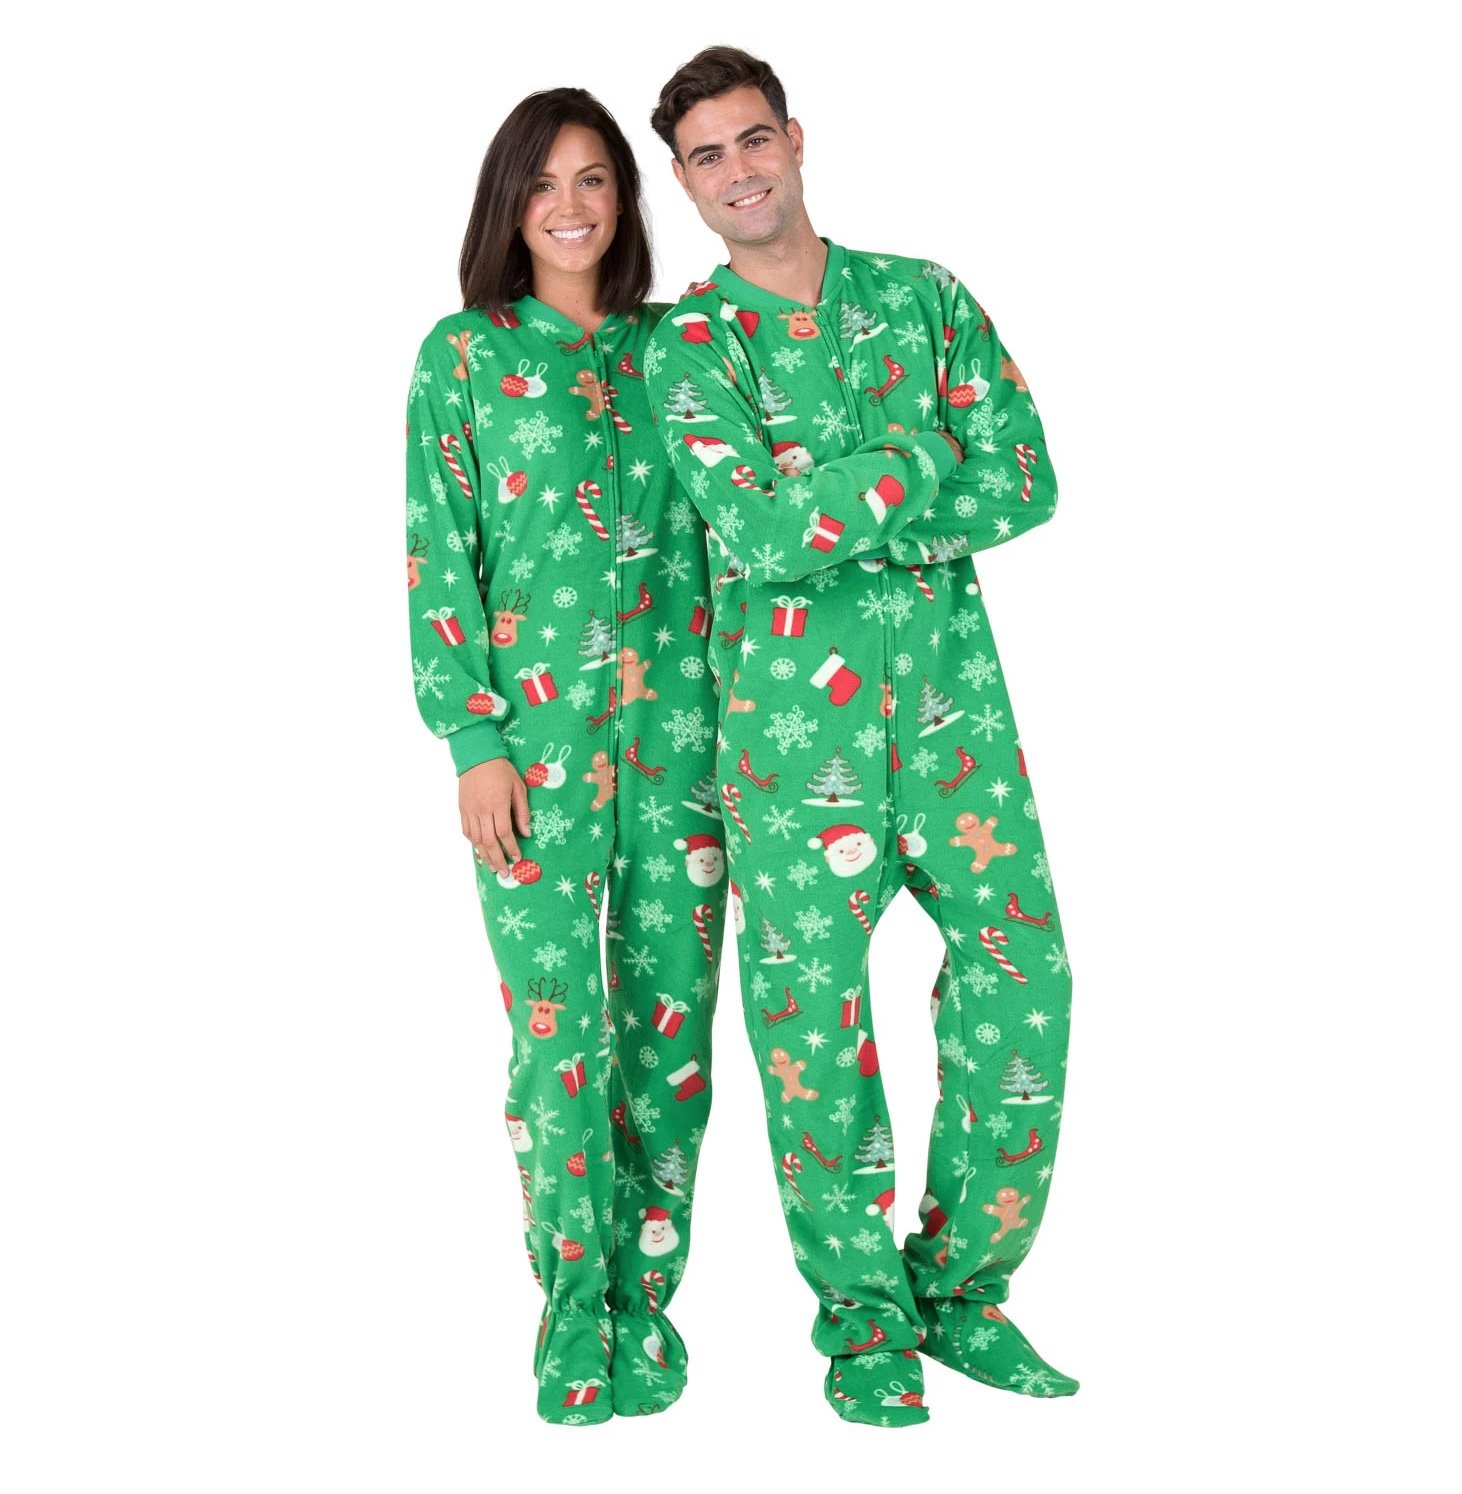 Footed Pajamas - Family Matching Green Christmas One Pieces for Boys, Girls, Men, Women and Pets - Pet - XLarge (Fits Up to 75 lbs) - image 3 of 7